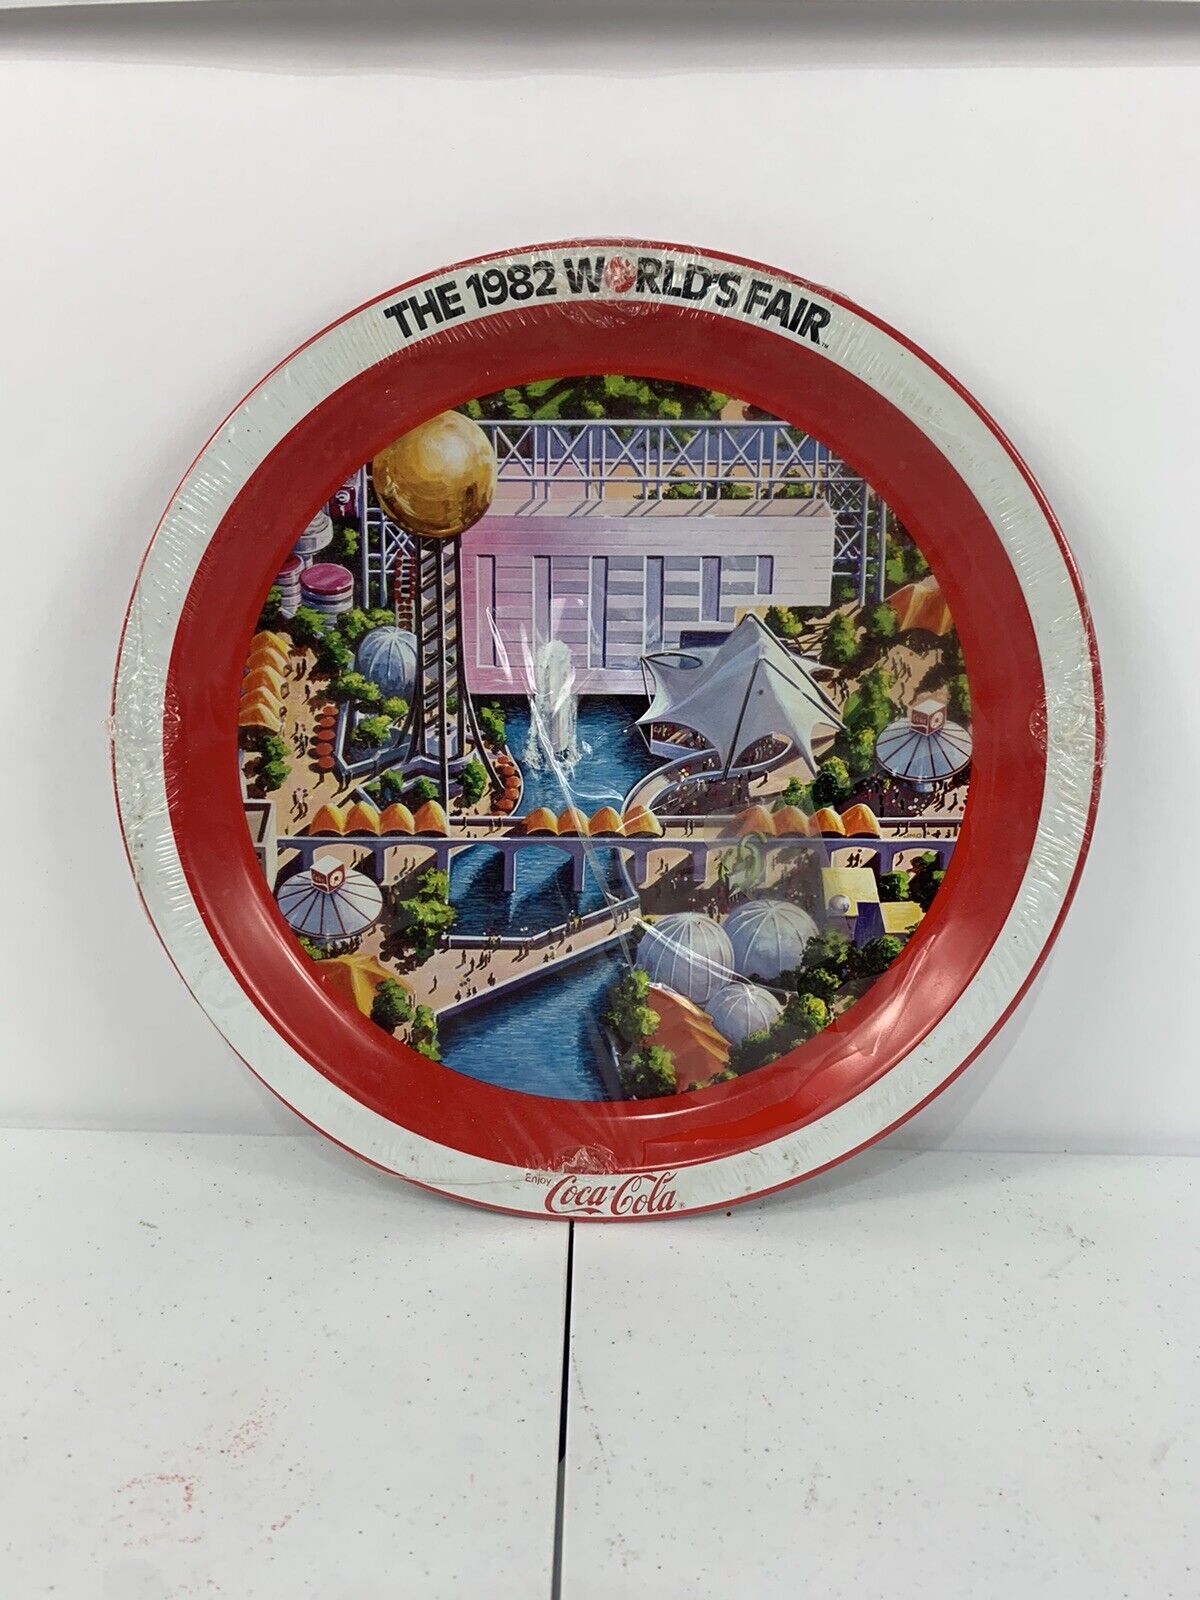 New Vintage The 1982 World’s Fair Coca-Cola Metal Plate